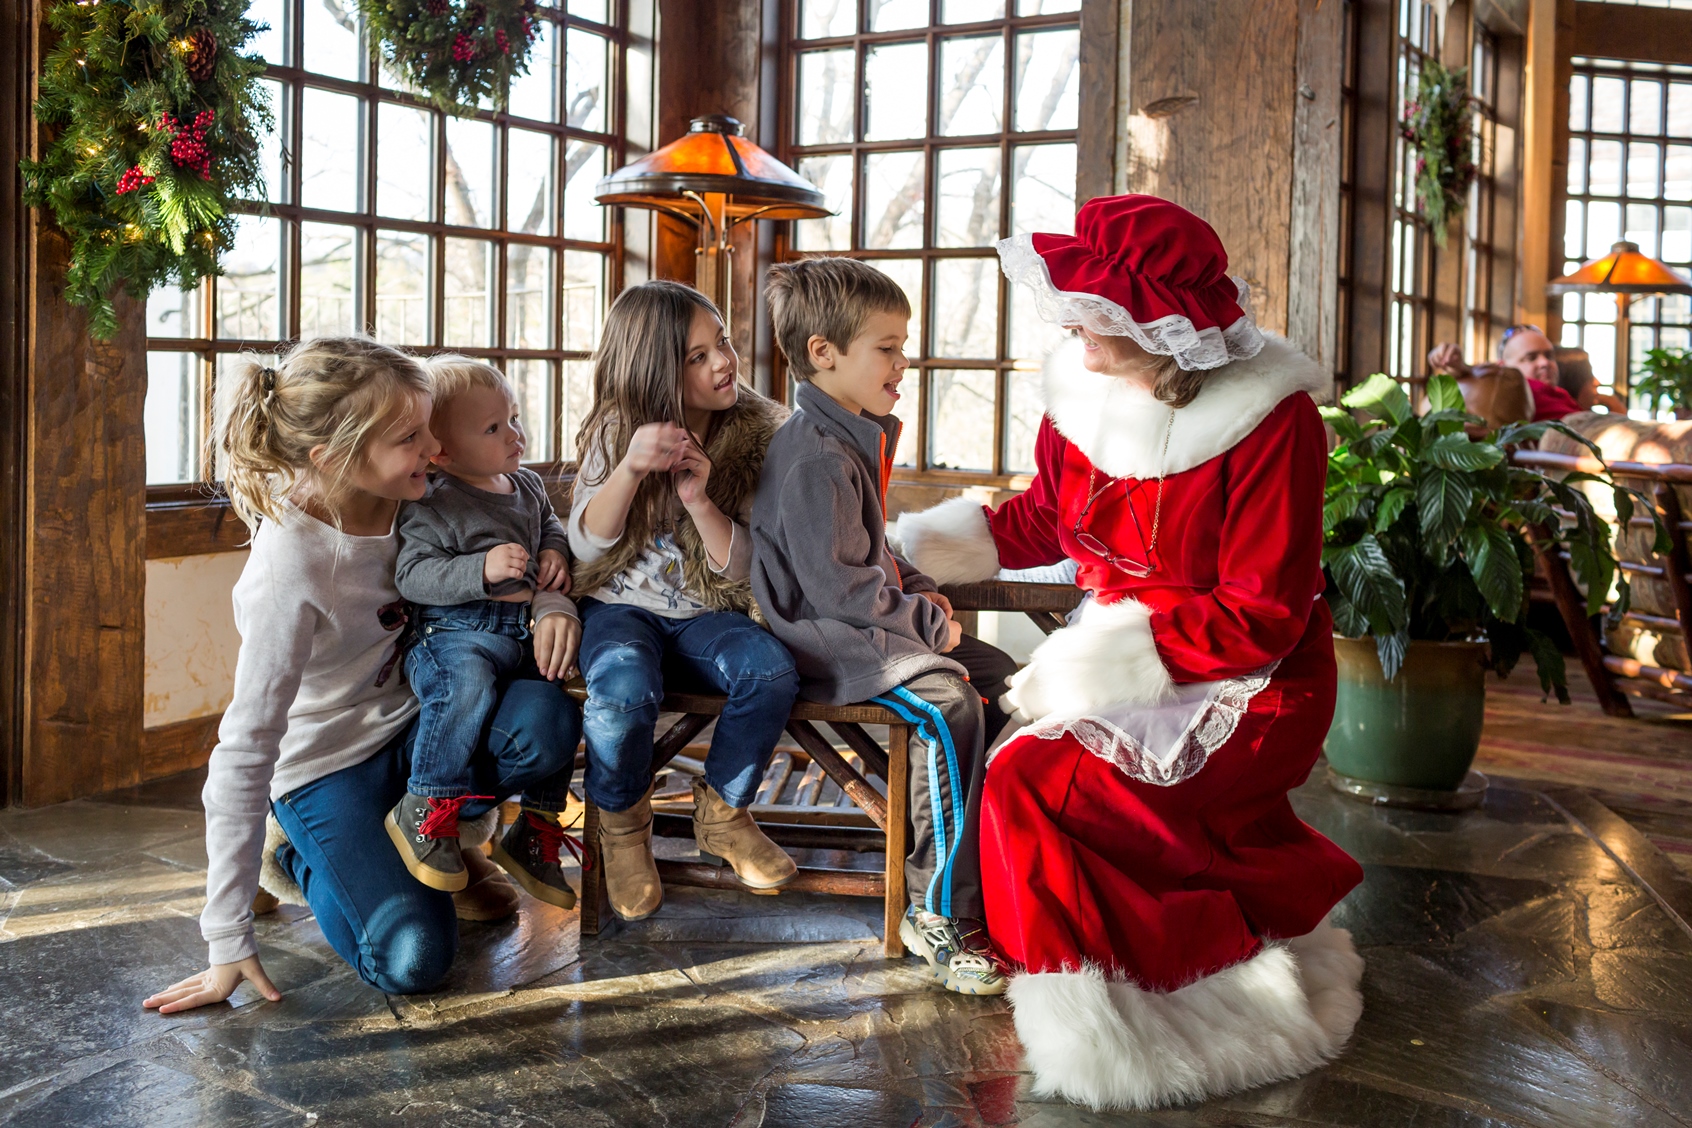 Mrs. Claus is reading to a group of eagerly listening children in the resort lobby